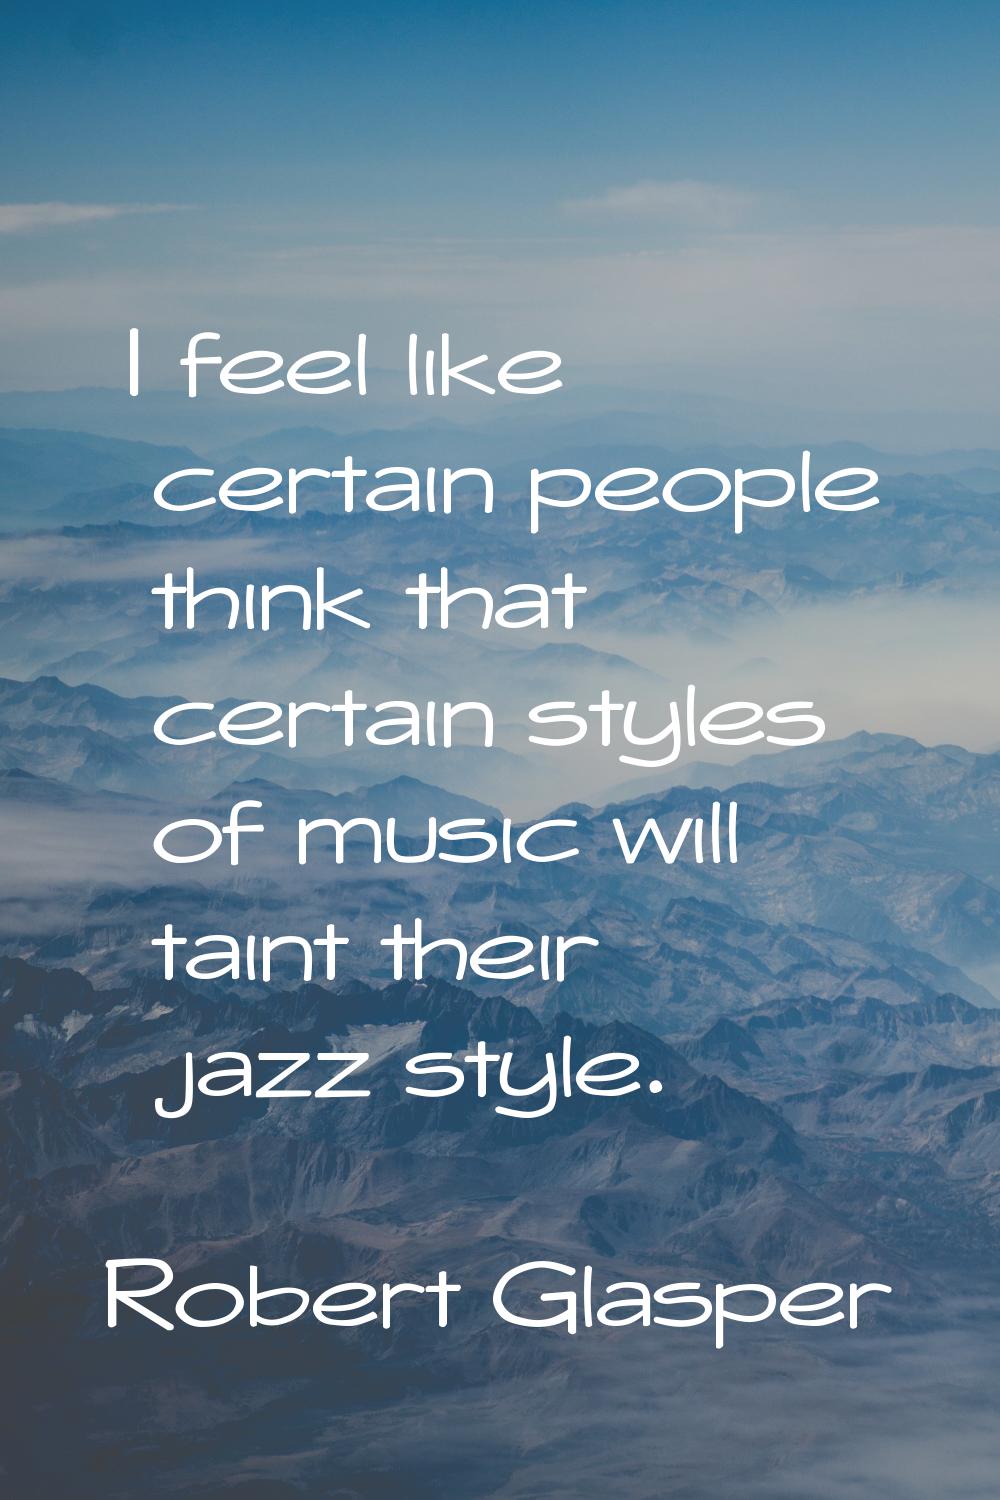 I feel like certain people think that certain styles of music will taint their jazz style.